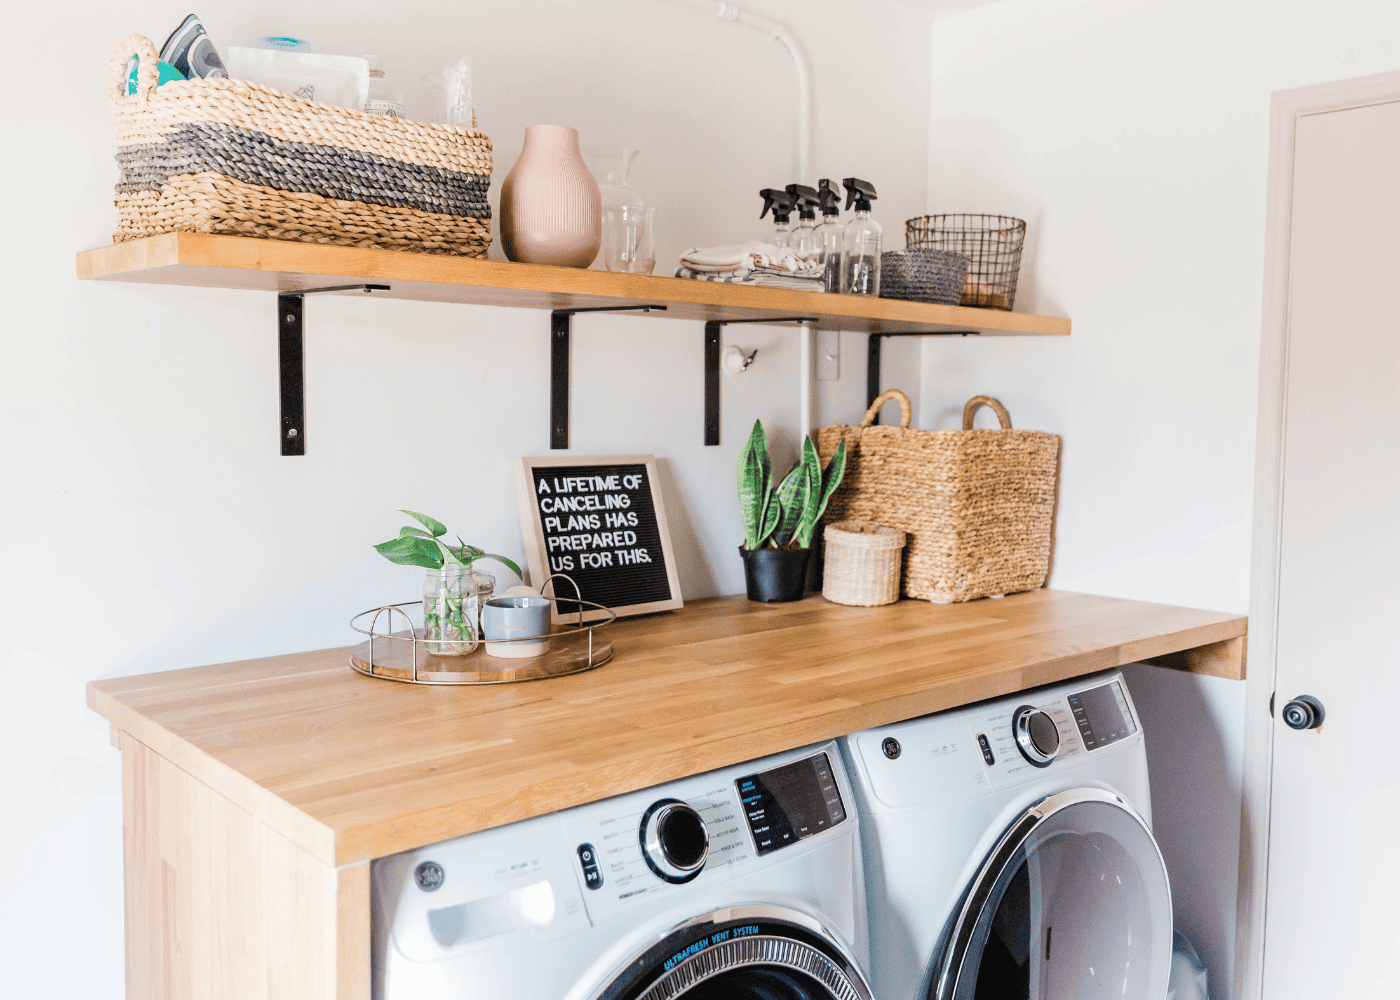 A laundry room with shelving and rattan baskets for storage.